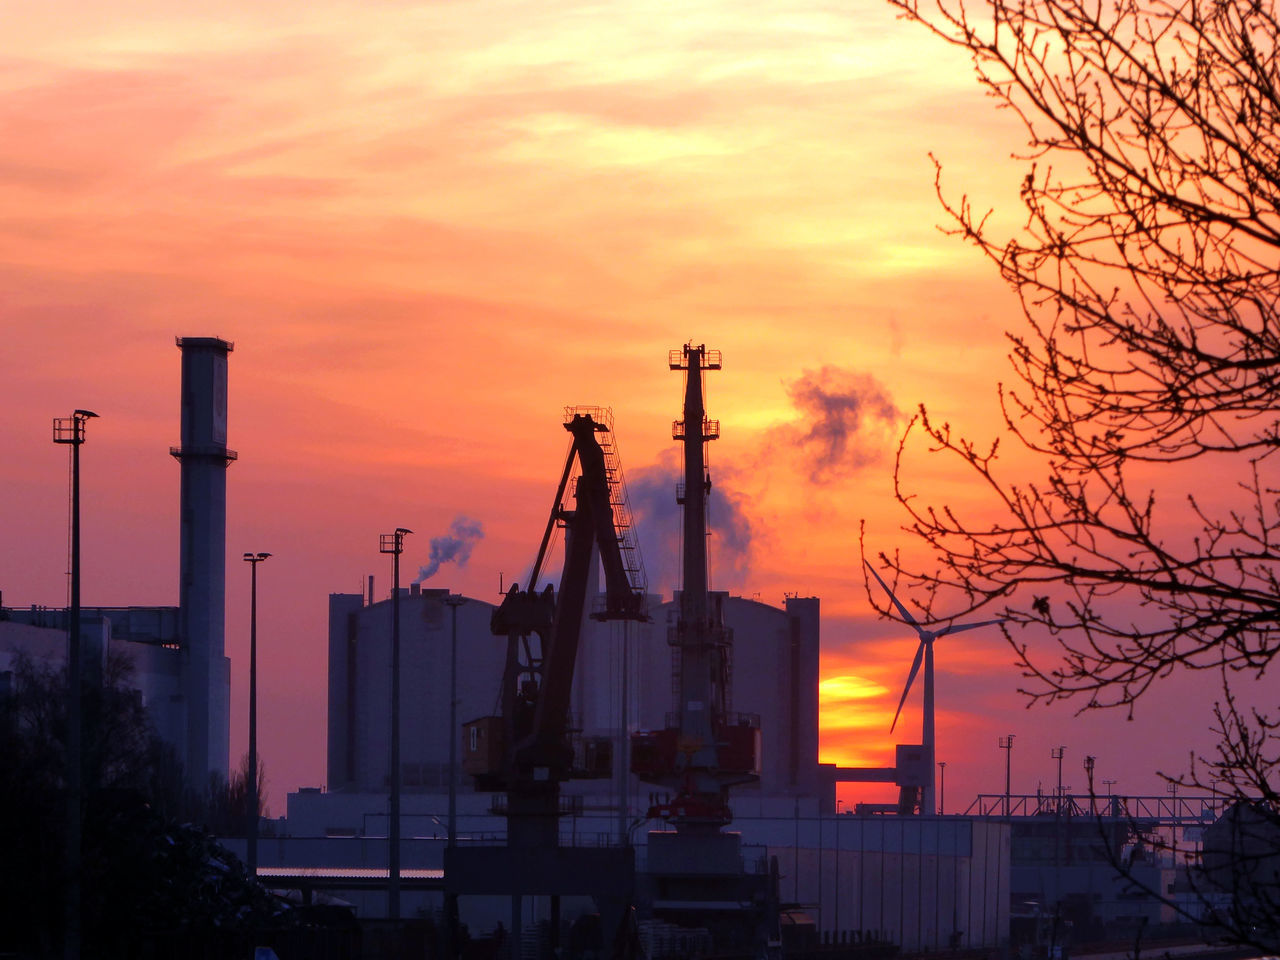 sunset, environment, industry, fuel and power generation, factory, environmental issues, sky, oil industry, smoke stack, social issues, built structure, refinery, no people, outdoors, gas, petrochemical plant, oil refinery